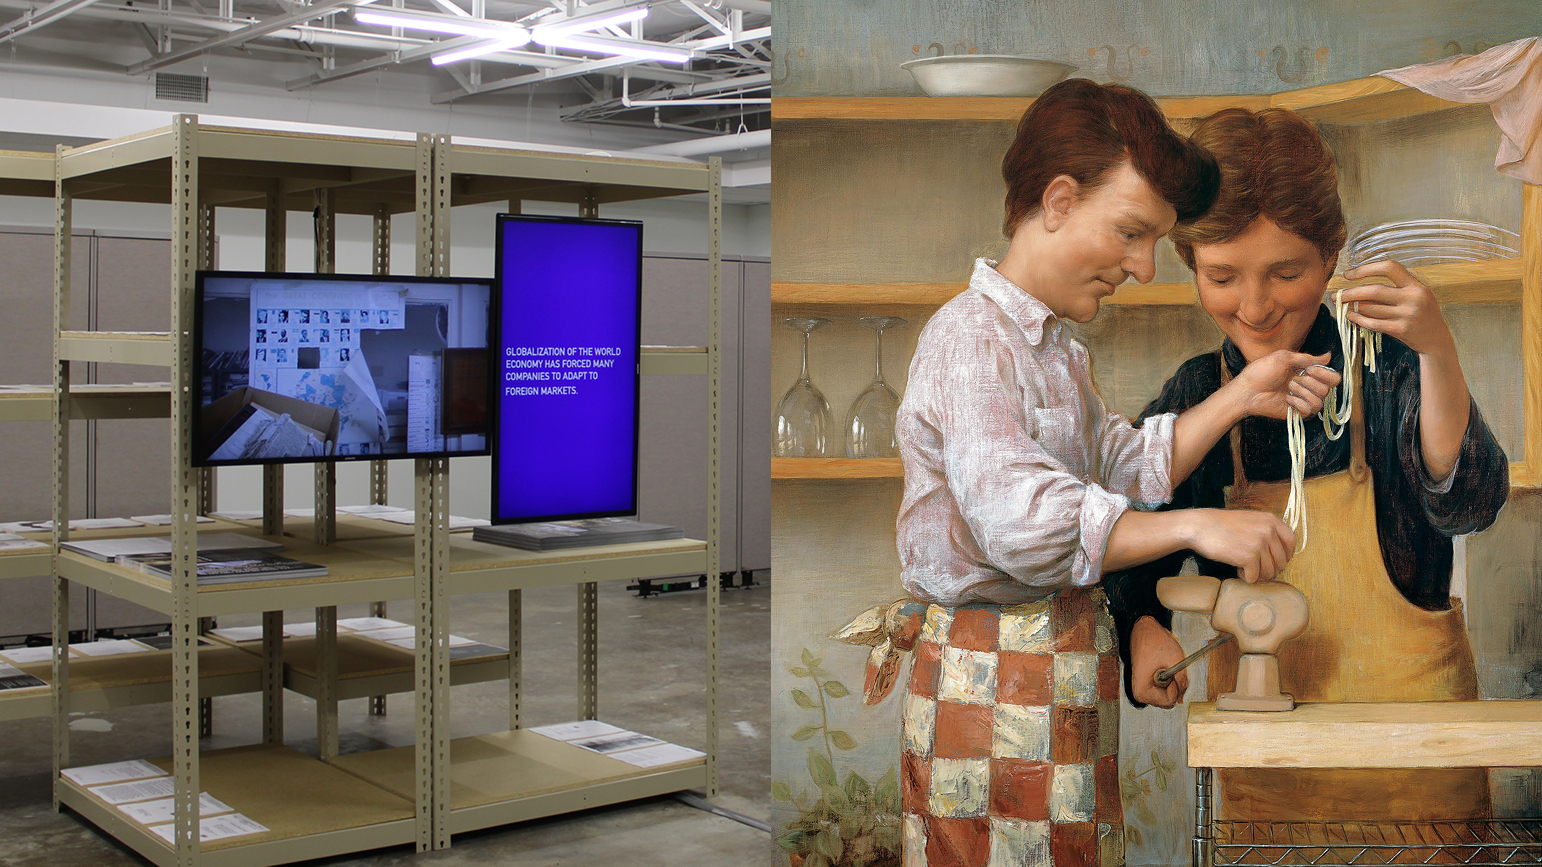 Two images - 1. metal shelving with two television screens; 2. painting of two men making pasta